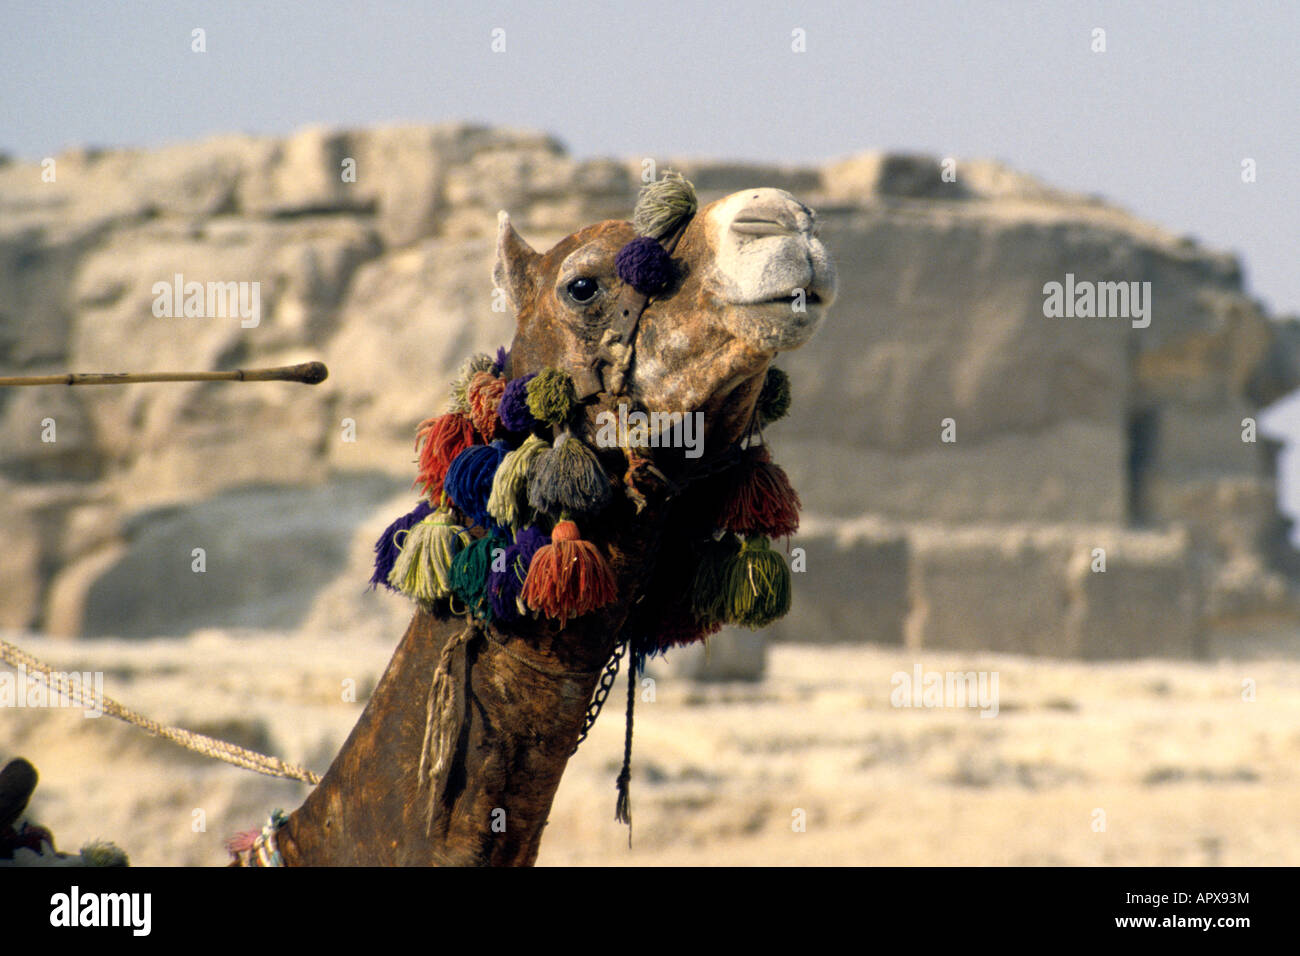 Portrait of a camel with colourful tassels around its neck Stock Photo